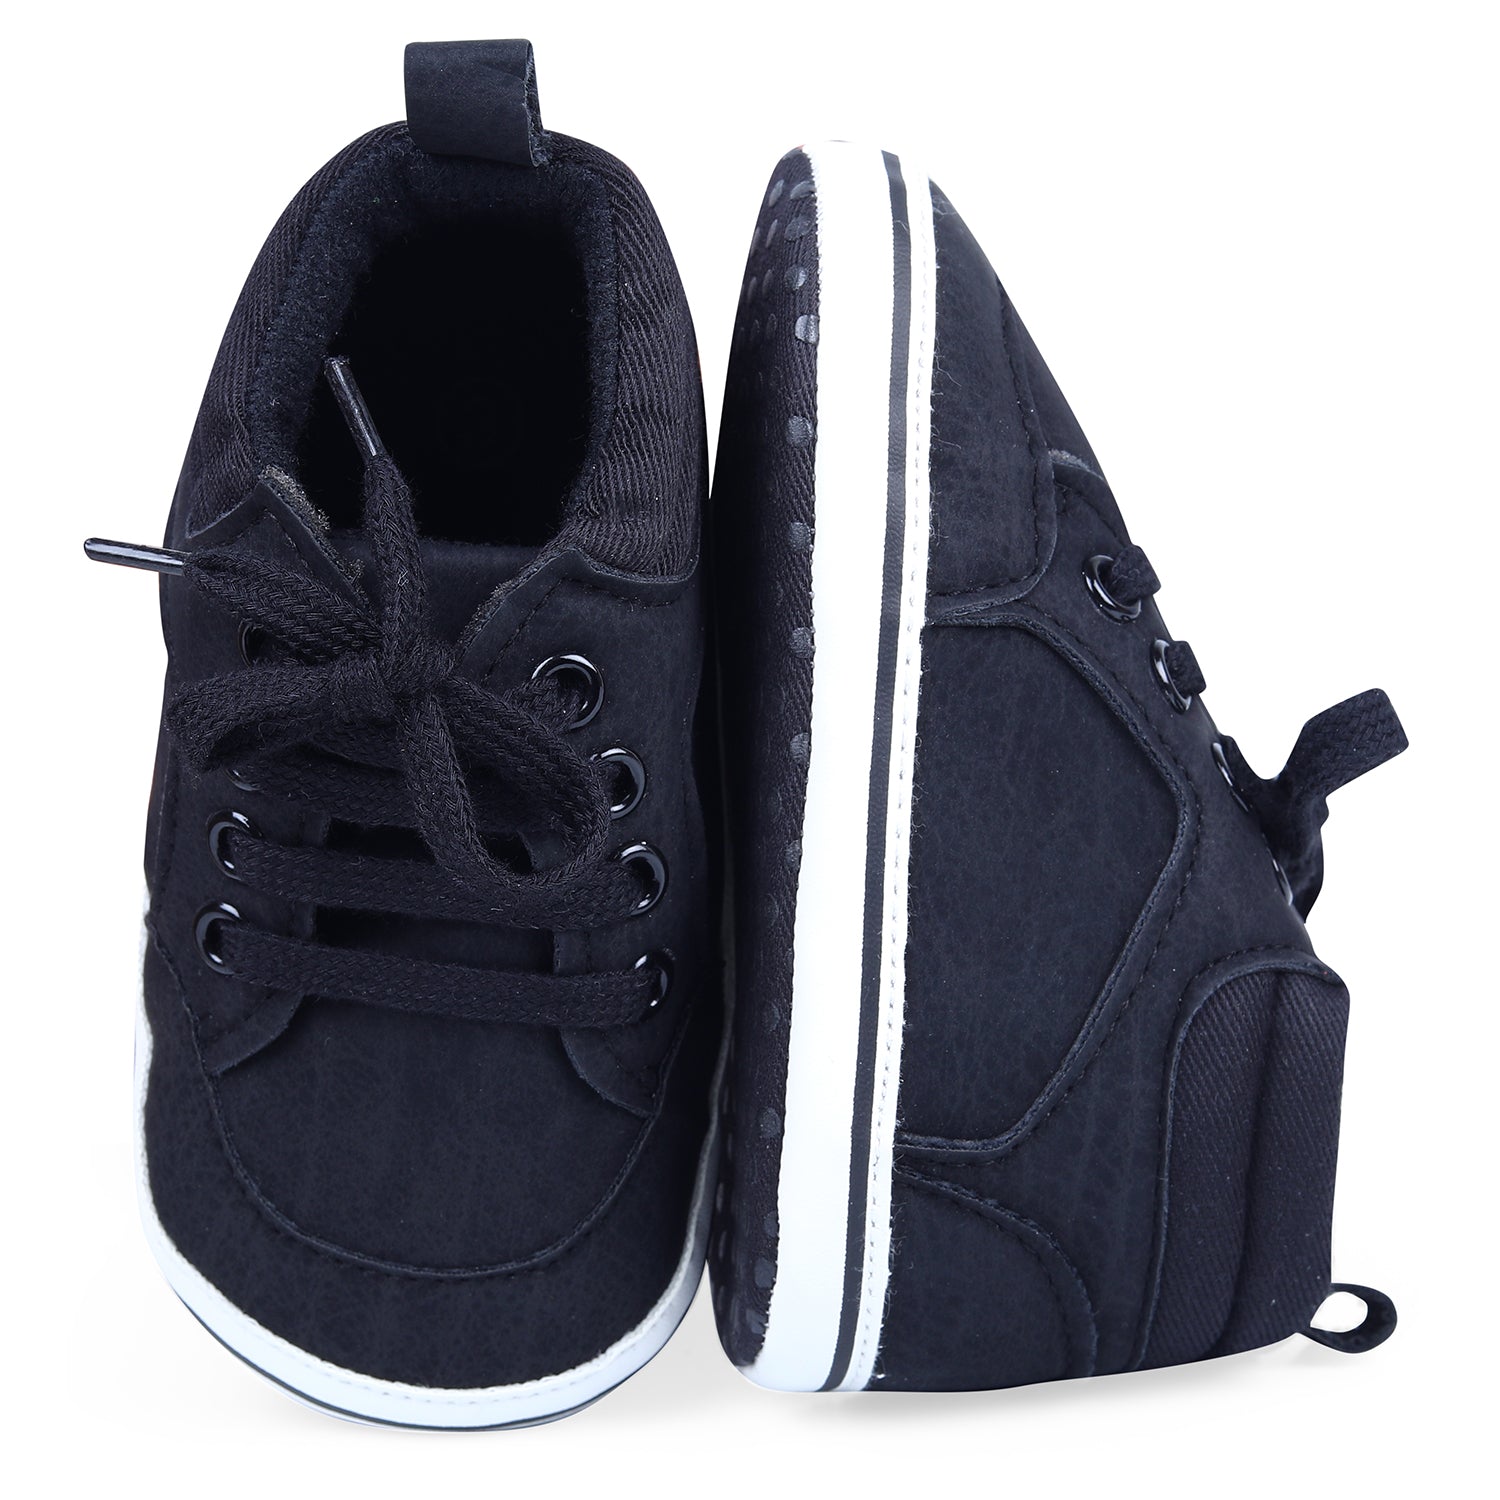 Textured Leather Lace-Up Stylish Anti-Slip Sneaker Shoes - Black